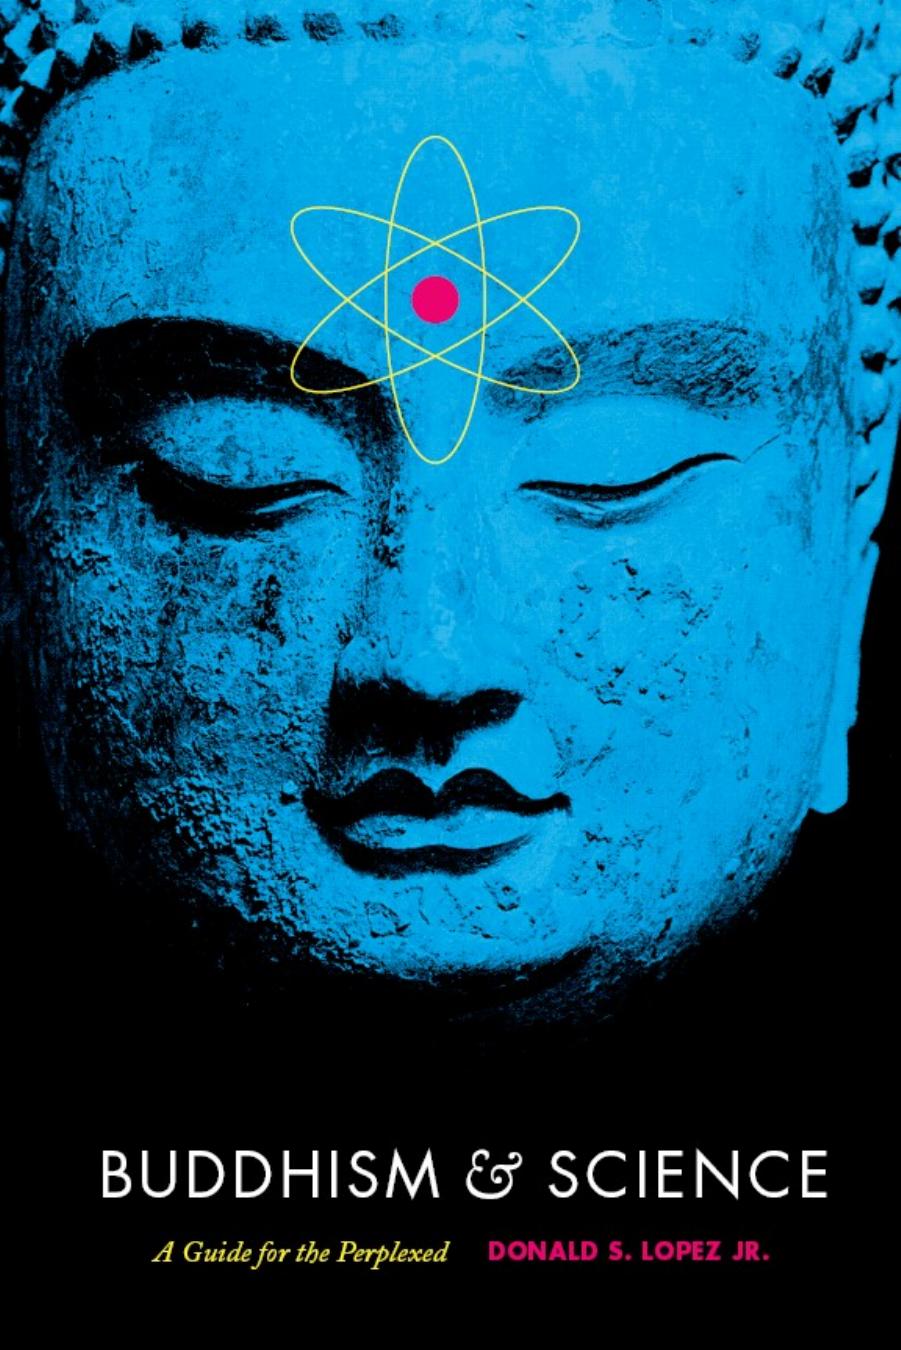 Buddhism and Science: A Guide for the Perplexed by Donald S. Lopez Jr